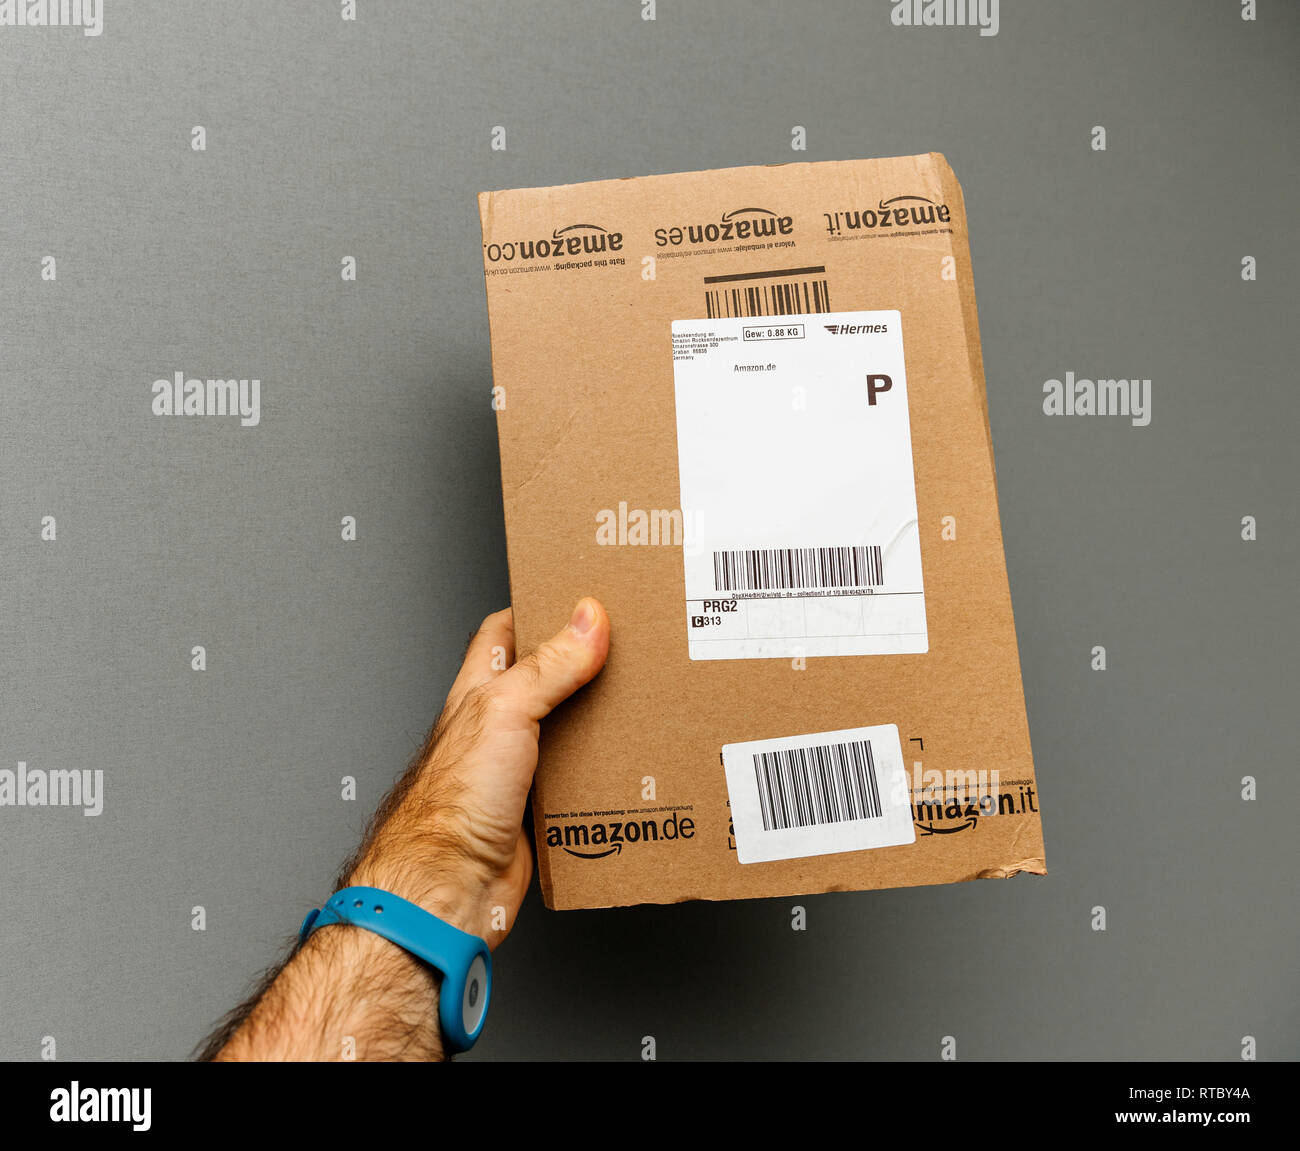 PARIS, FRANCE - OCT 30, 2017: Man holding Amazon Germany Hermes prime  cardboard delivery box against gray background Stock Photo - Alamy